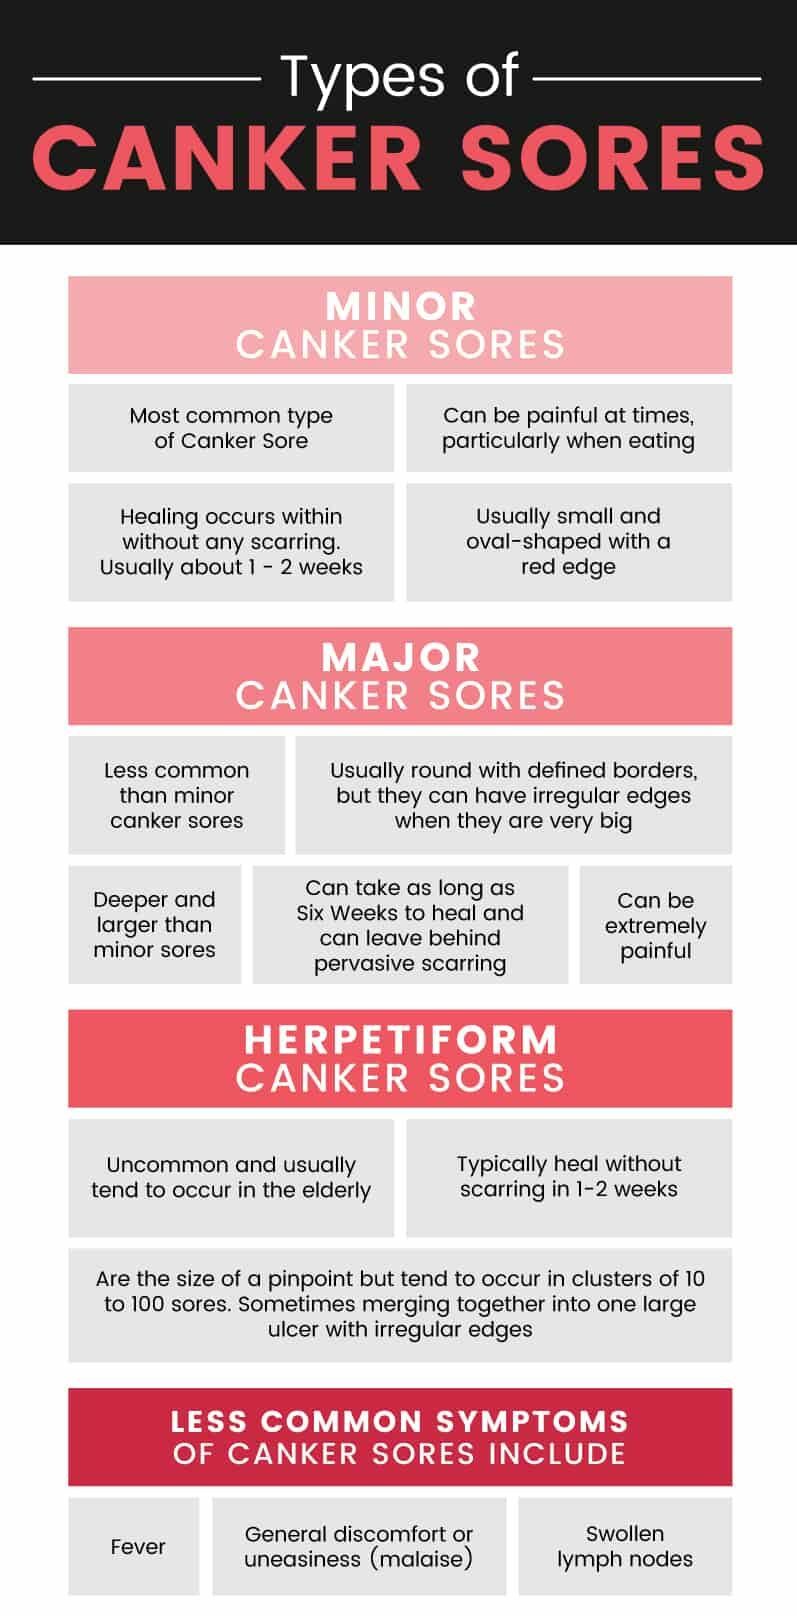 Canker sore: types of canker sores - Dr. Axe